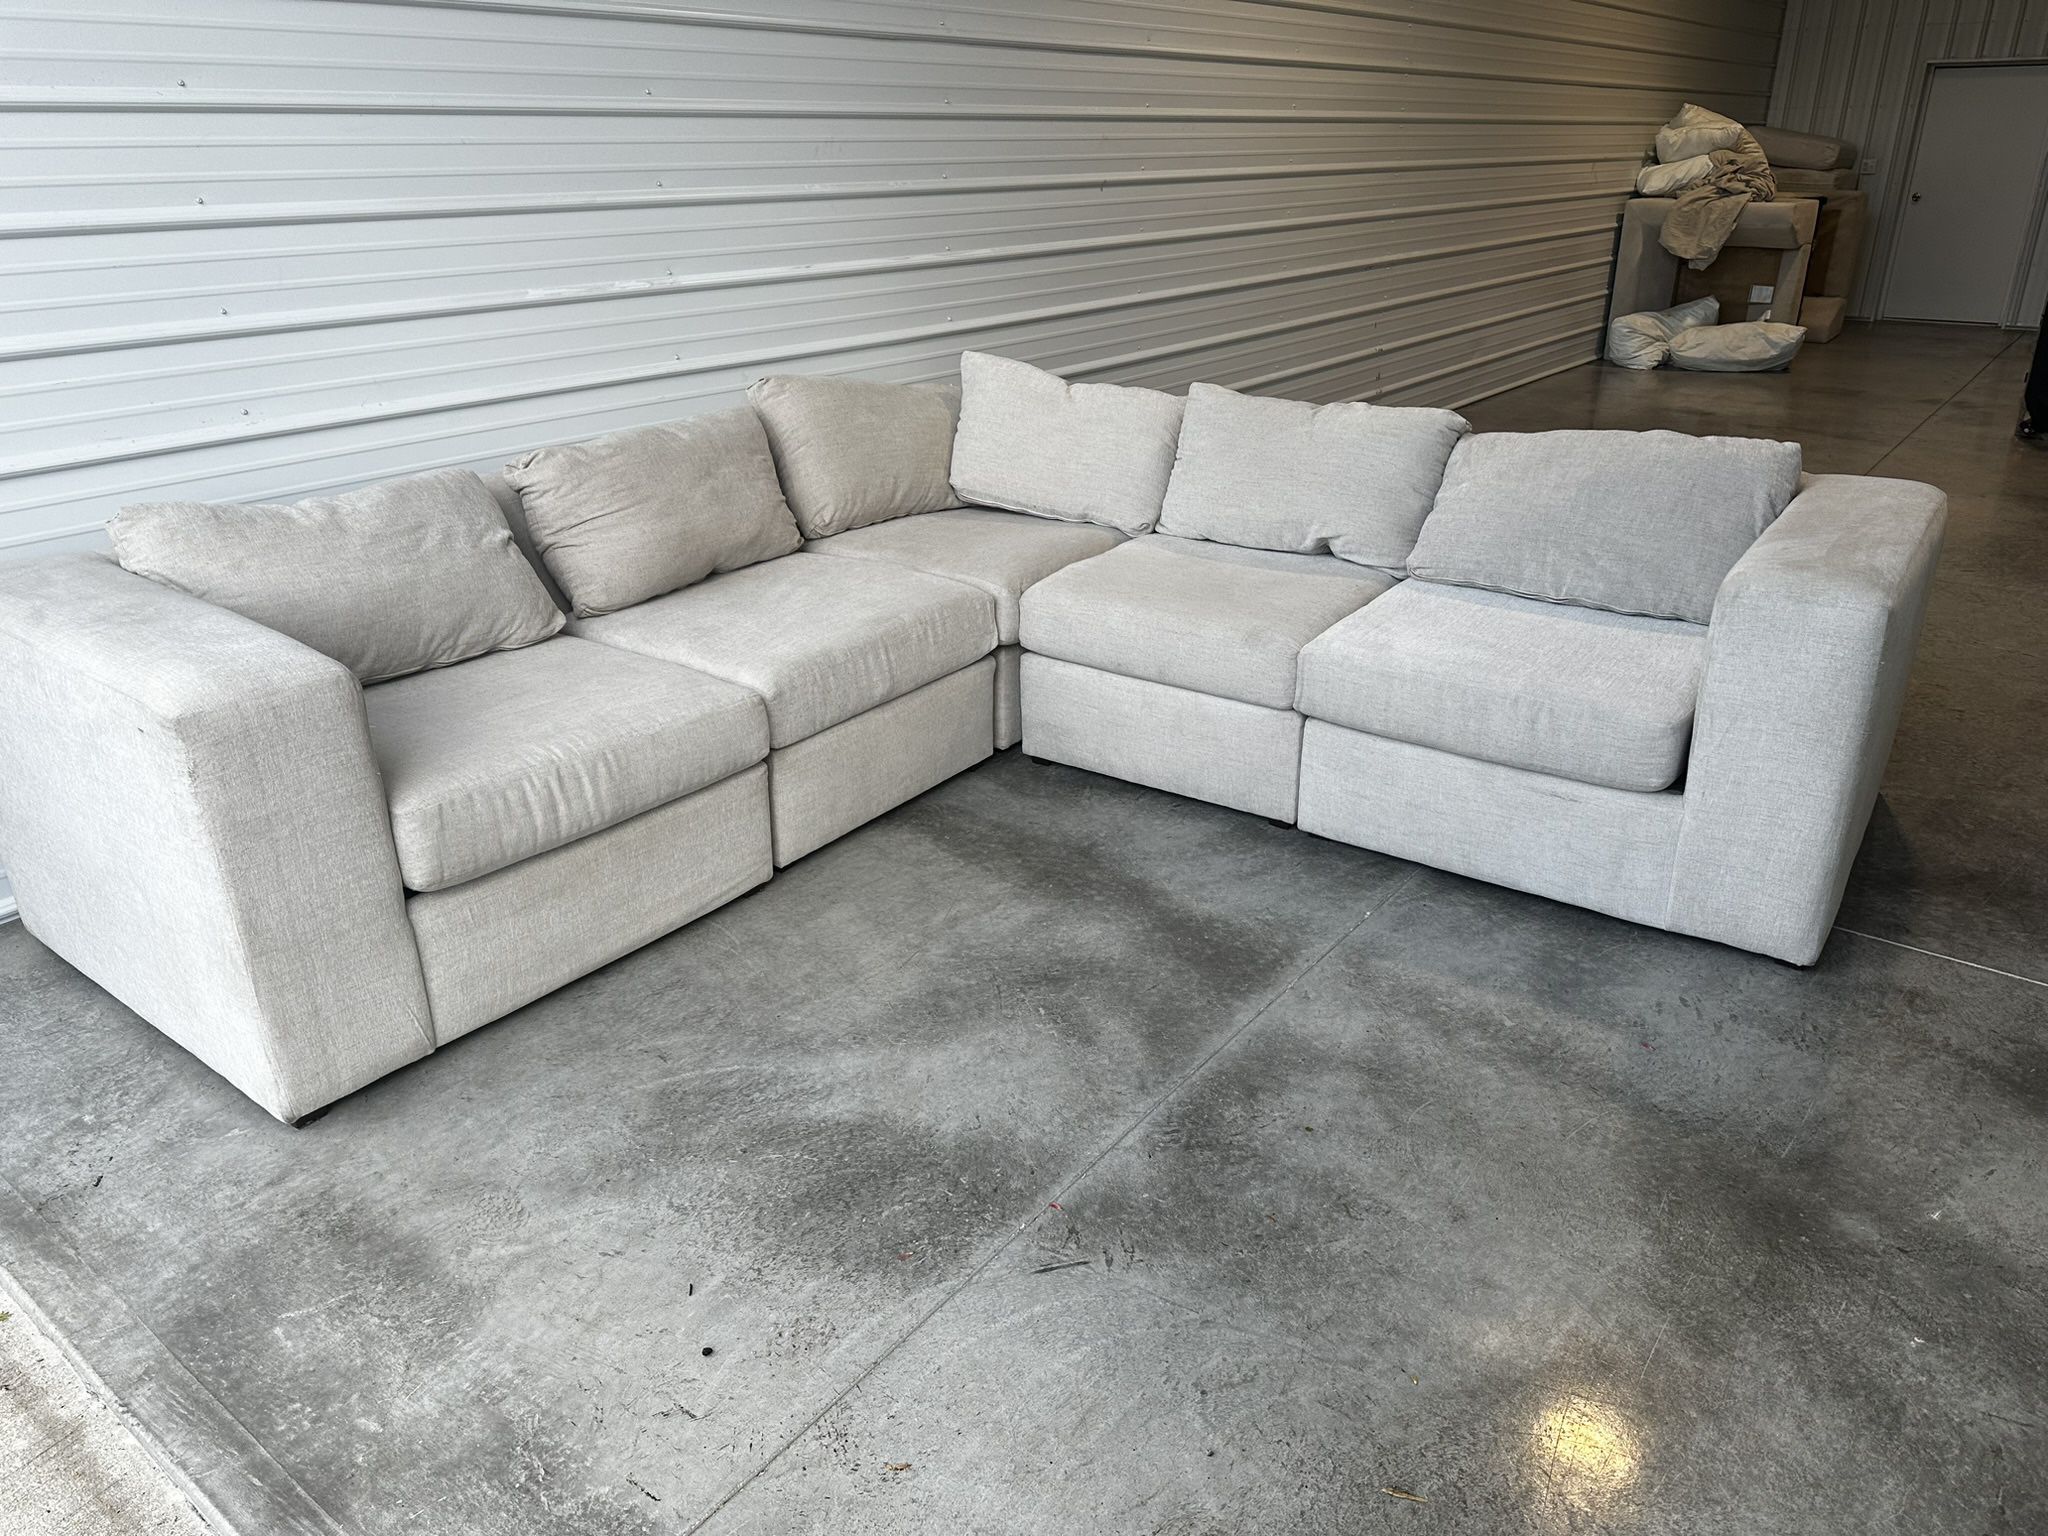 Value City Collin Sectional